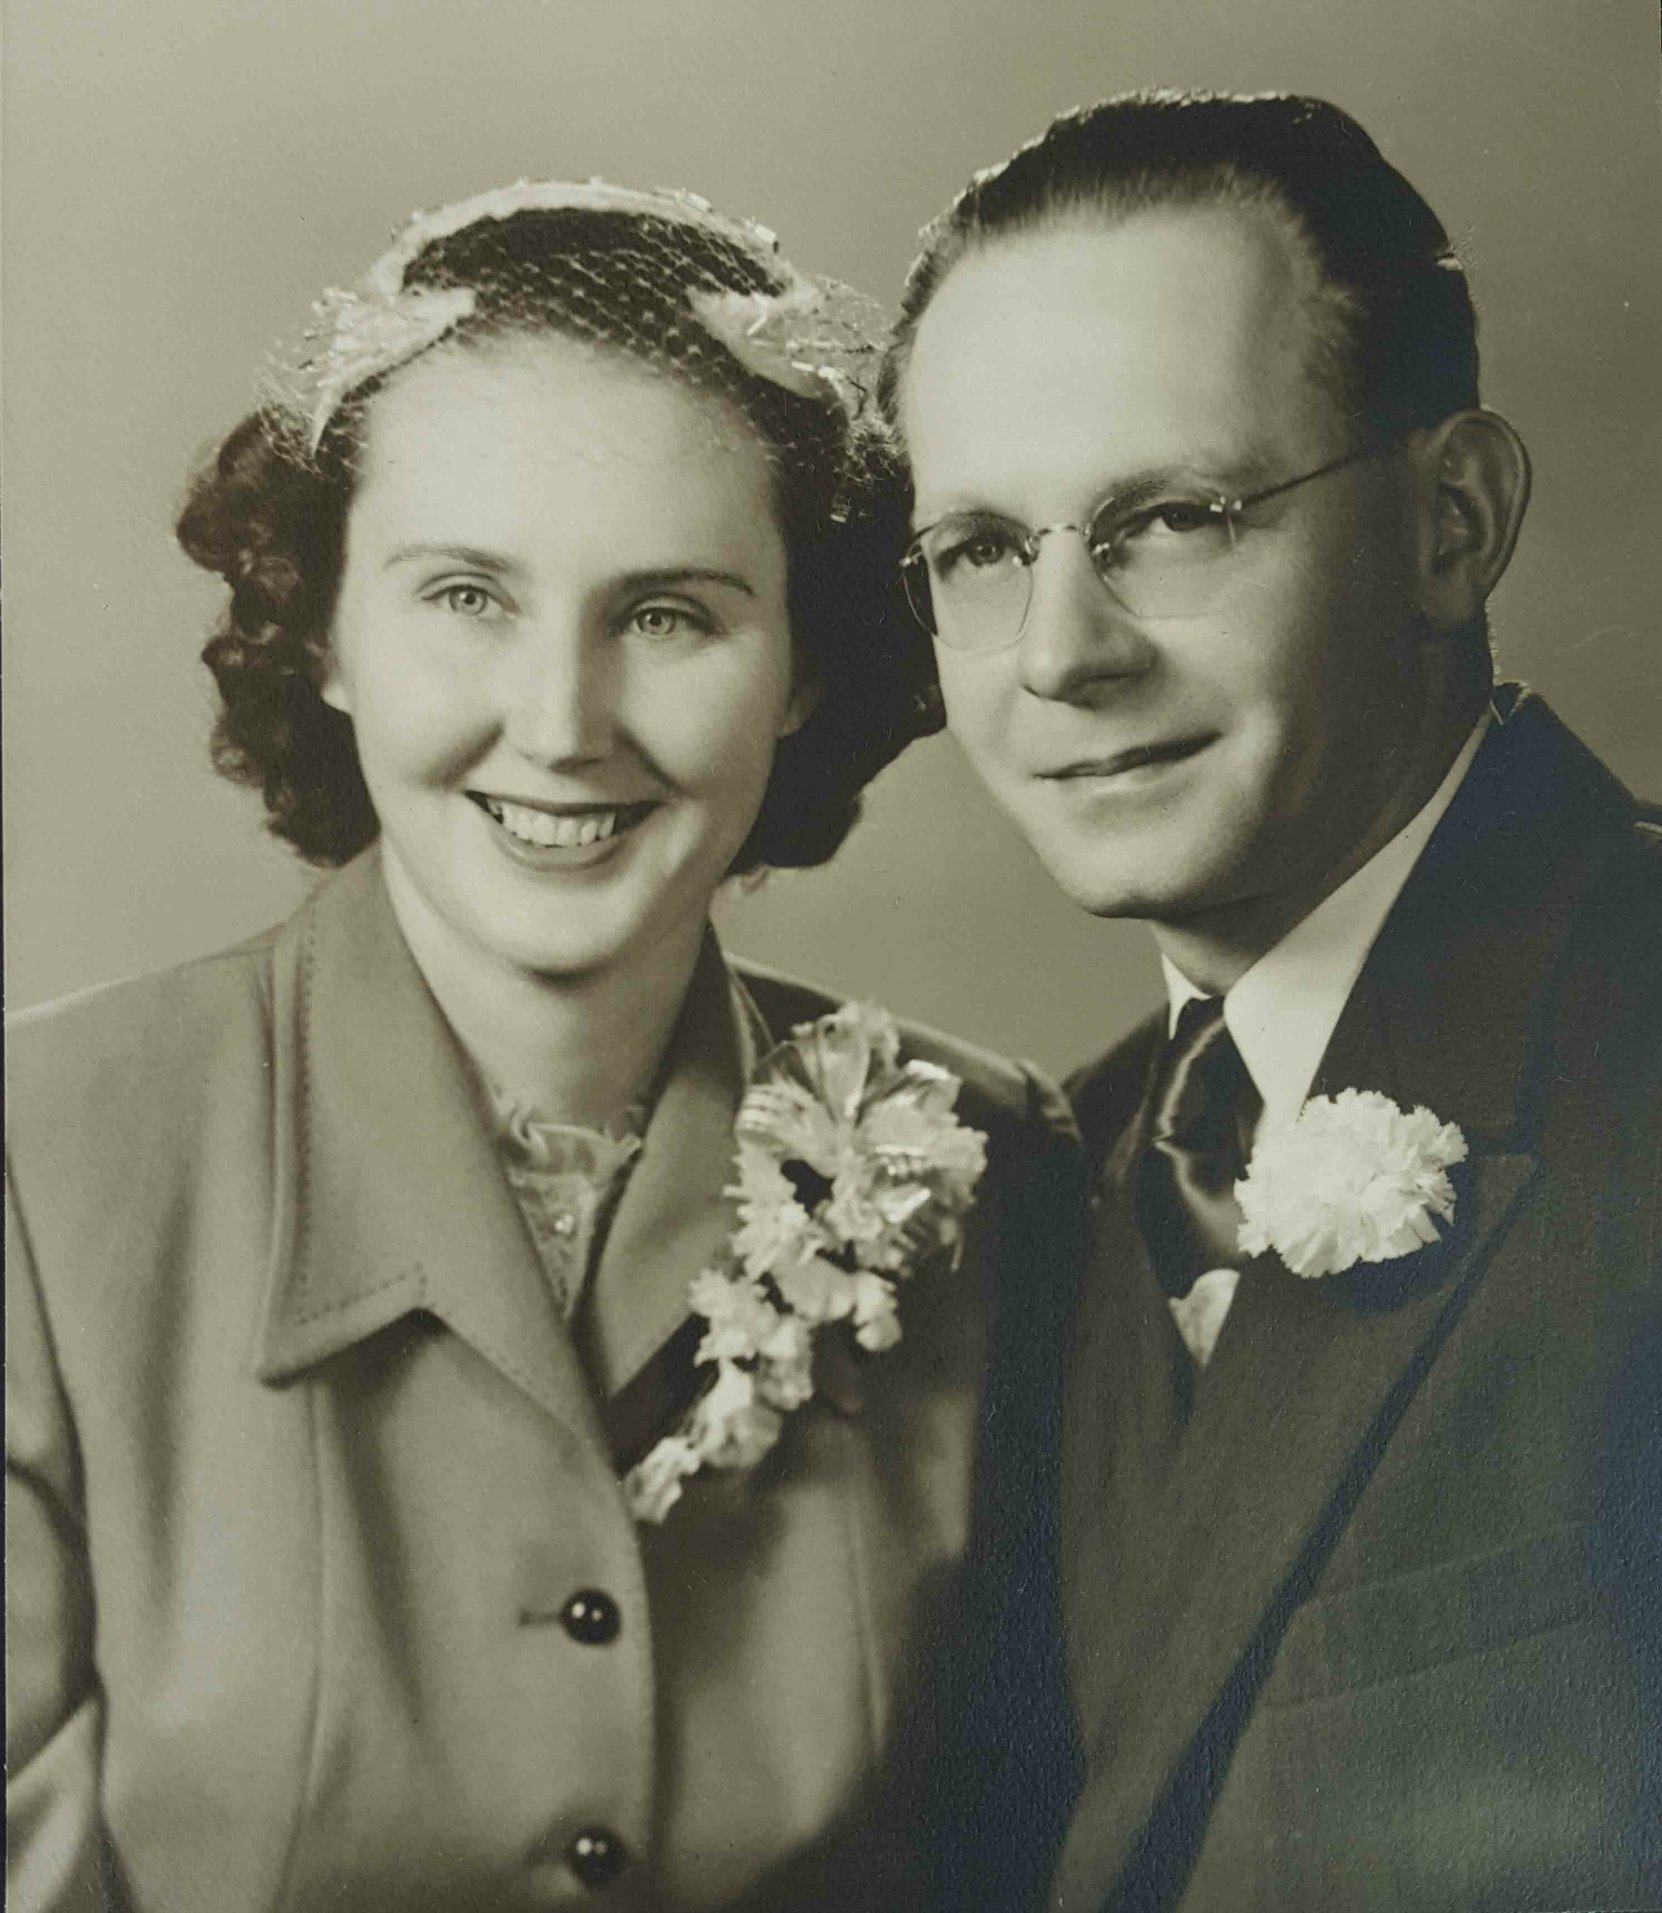 Alice Violet Lauder and Casimir Kopec on their wedding day, 9 December 1953